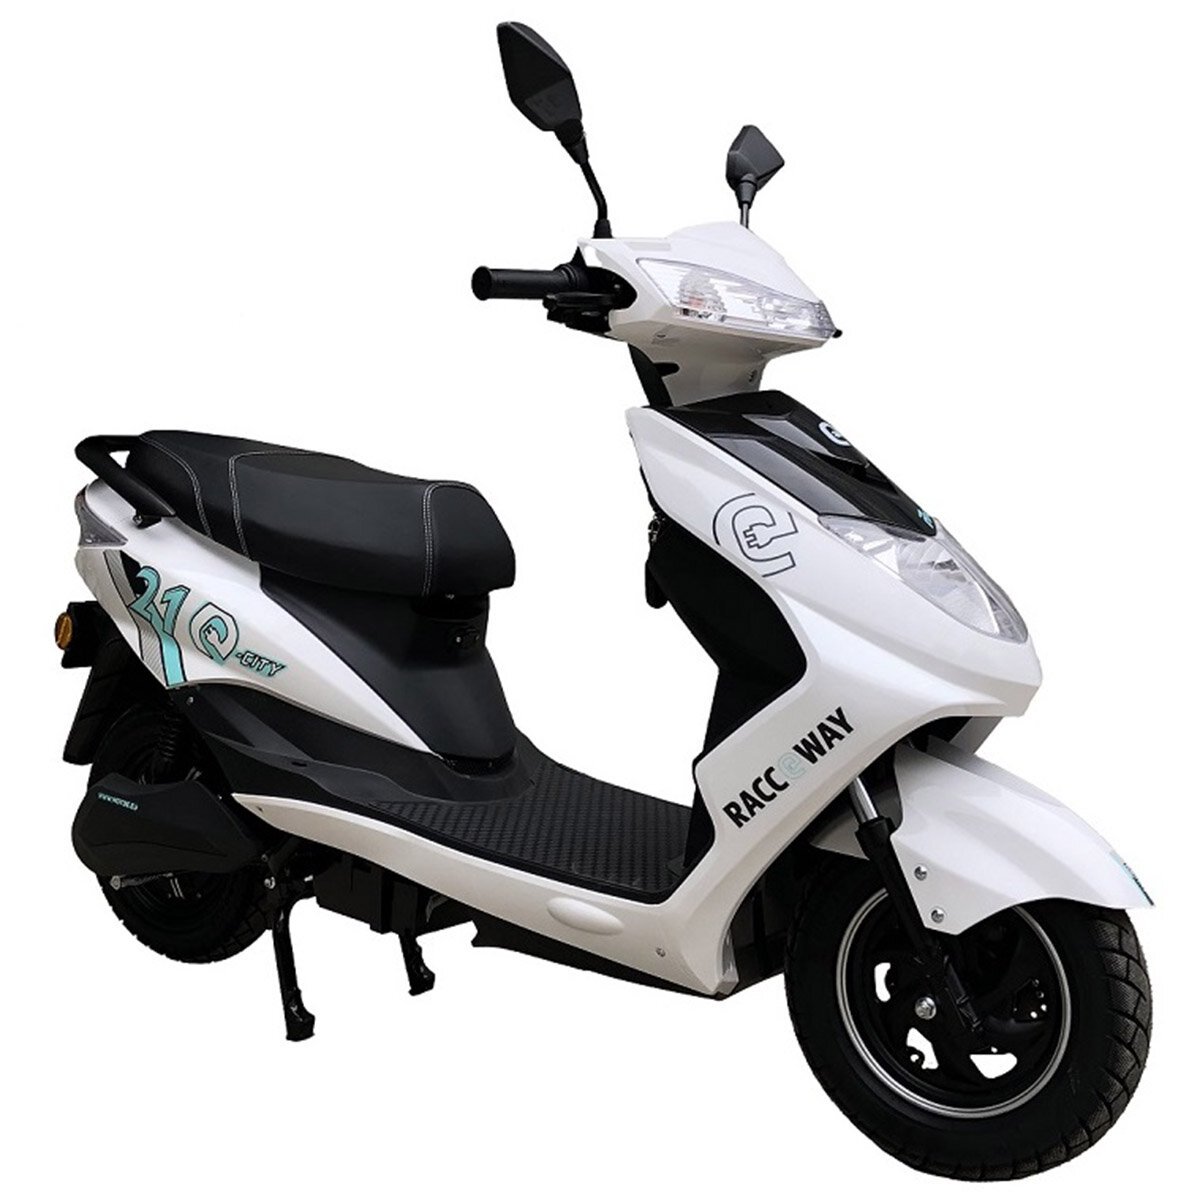 best price,racceway,motoe,03,electric,scooter,72v,20ah,1500w,10inch,eu,coupon,price,discount